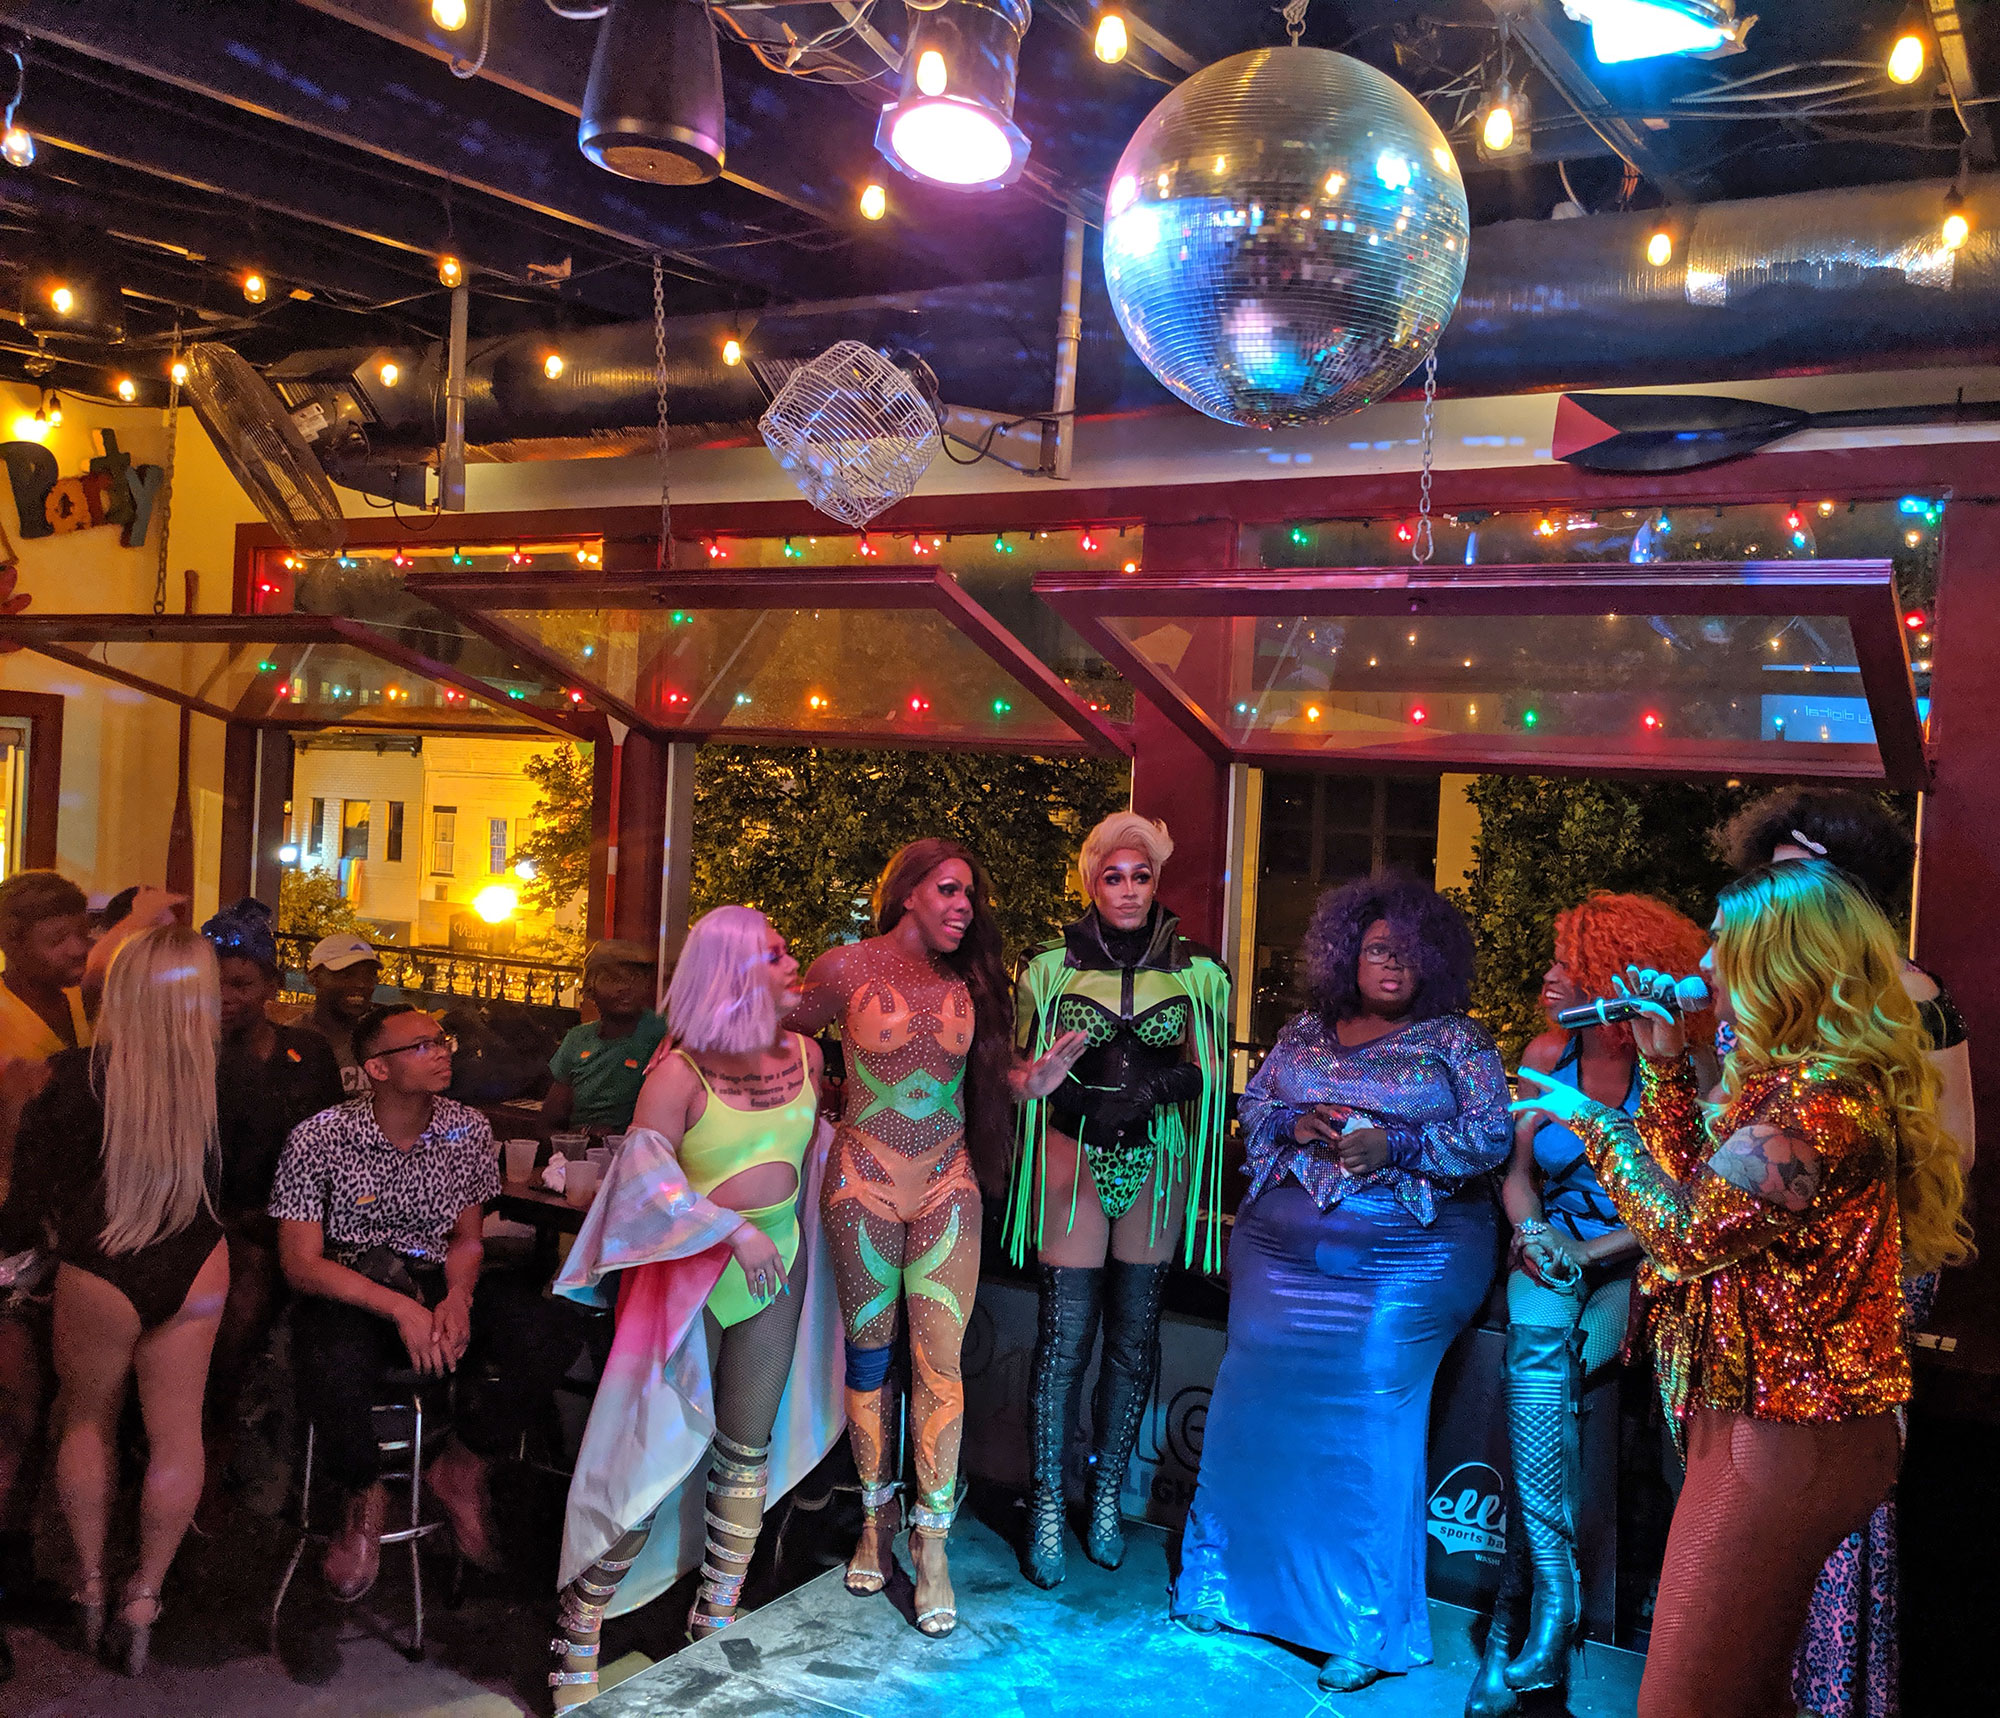 The cast of Snatched Wednesdays drag show at Nellie's.